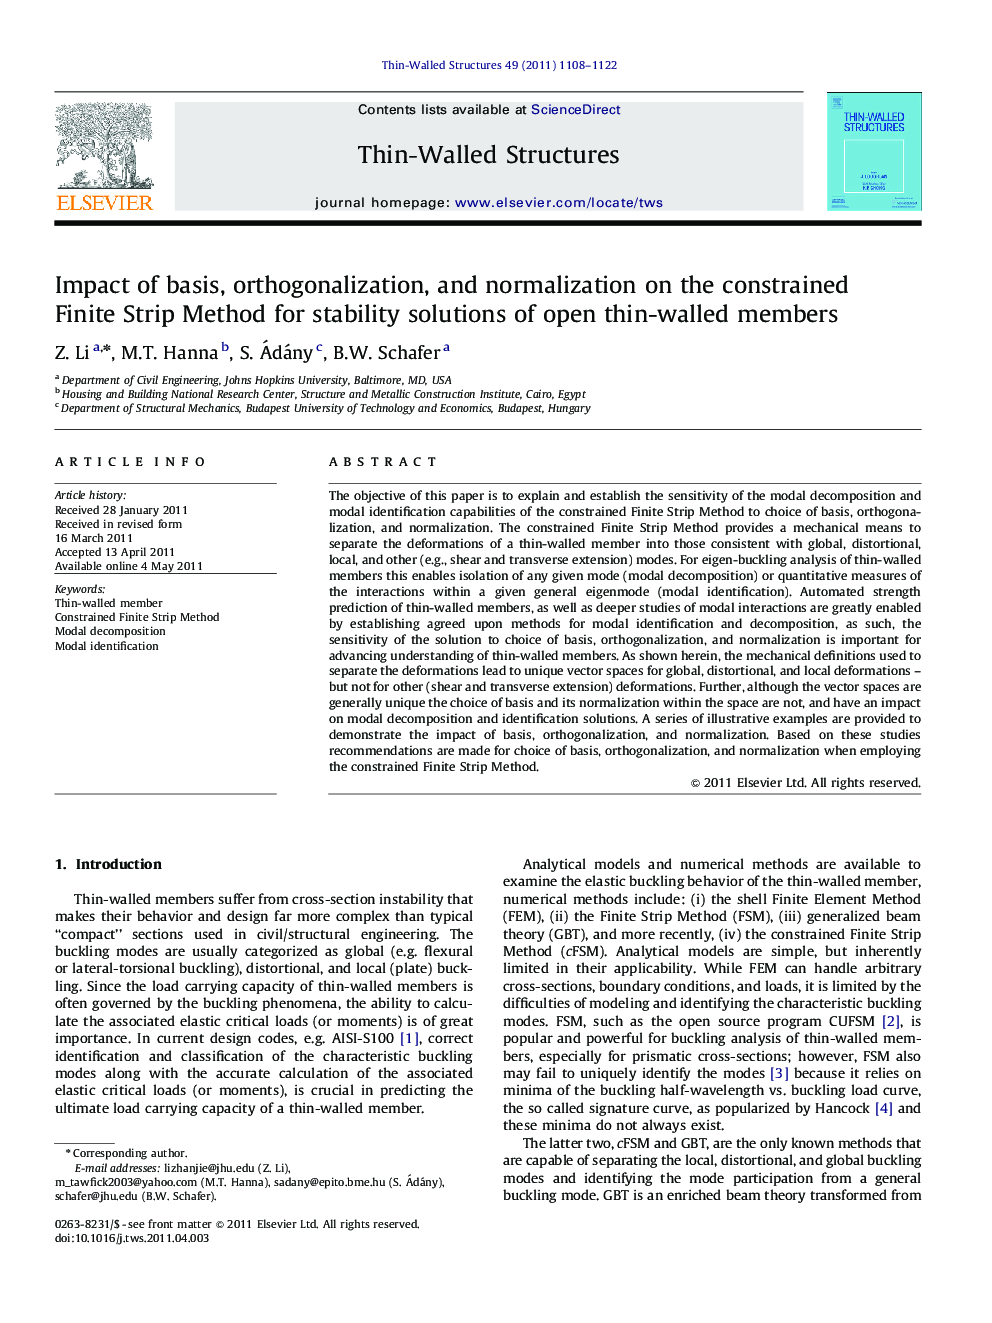 Impact of basis, orthogonalization, and normalization on the constrained Finite Strip Method for stability solutions of open thin-walled members